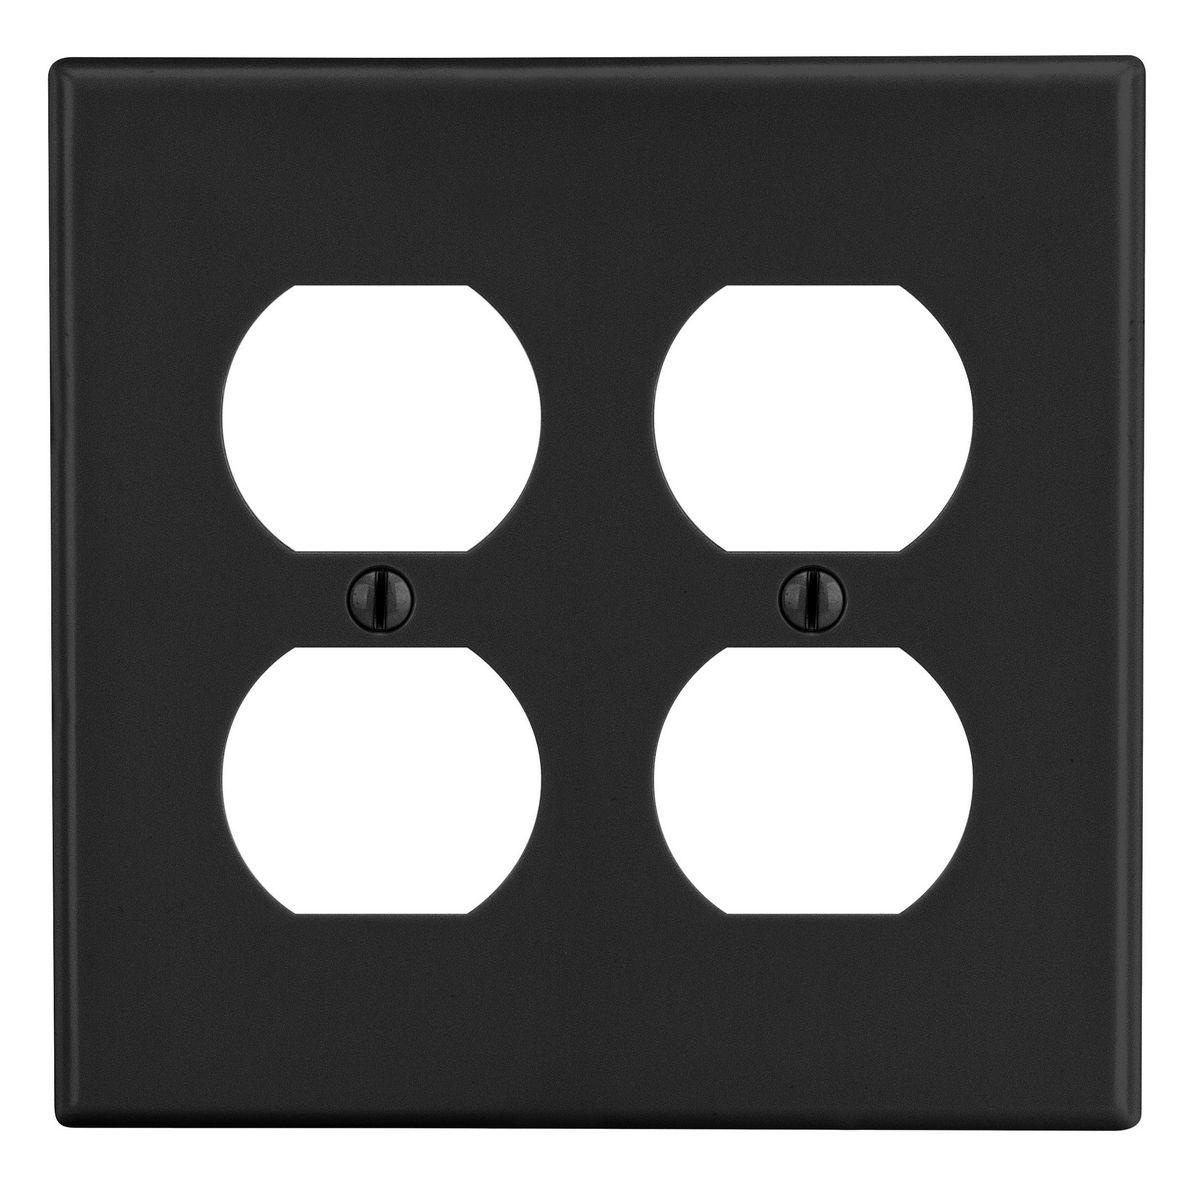 Hubbell PJ82BK Wallplate, Mid-Size 2-Gang, 2) Duplex, Black  ; High-impact, self-extinguishing polycarbonate material ; More Rigid ; Sharp lines and less dimpling ; Smooth satin finish ; Blends into wall with an optimum finish ; Smooth Satin Finish